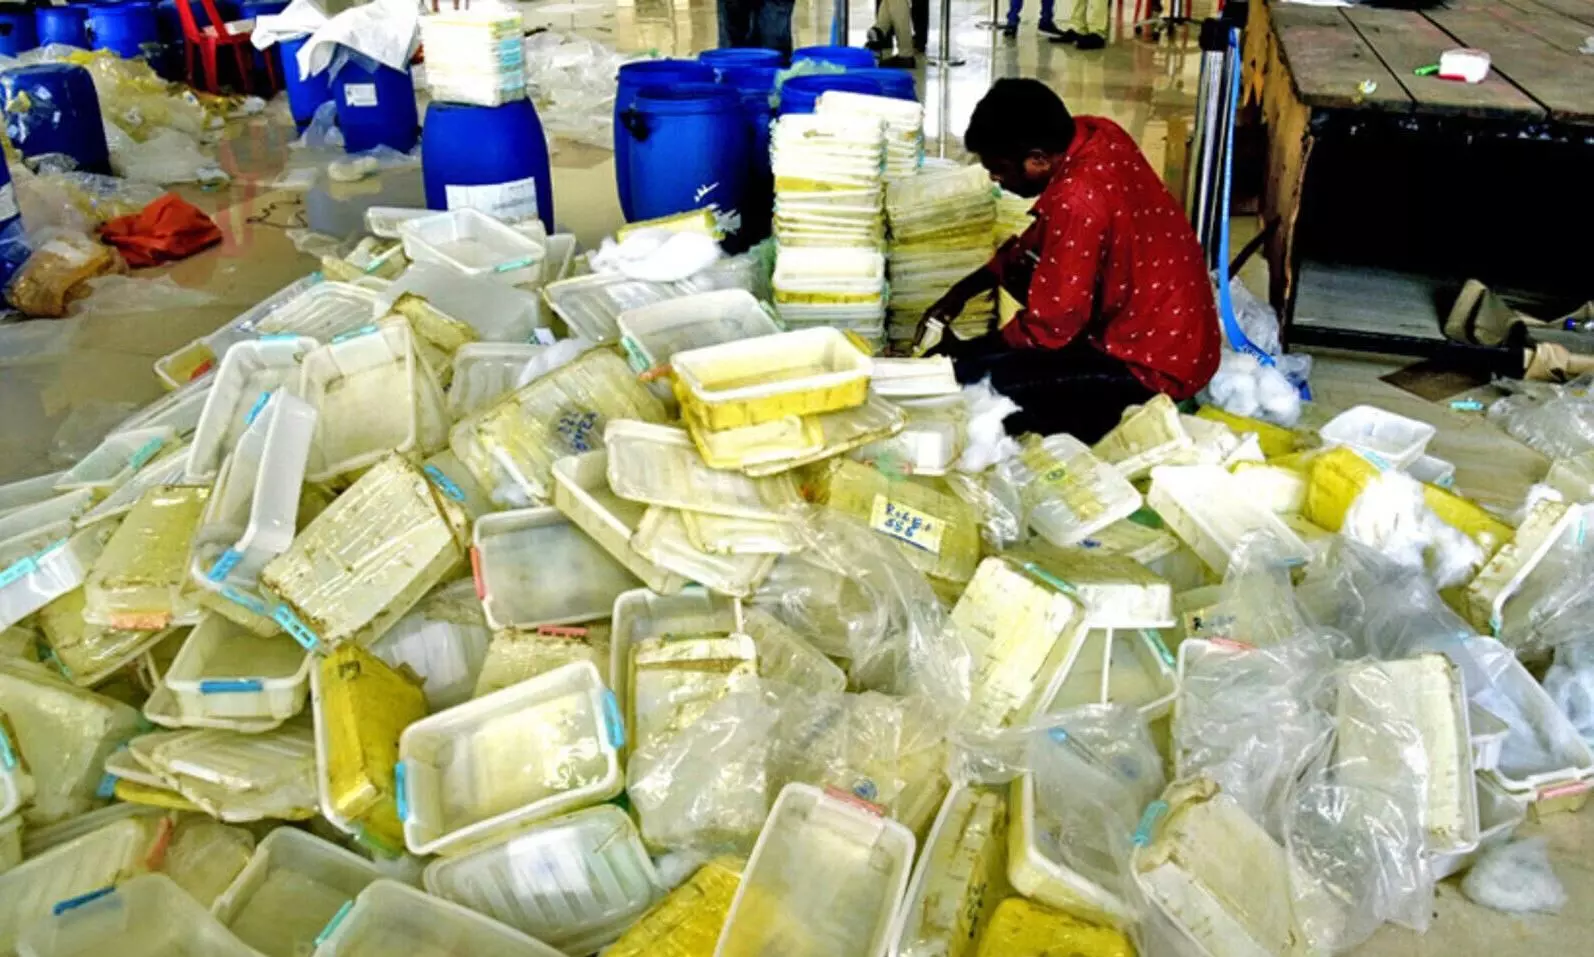 NCBs Saturday drug haul valued at Rs 25,000 Cr, weighs 2,525 kg